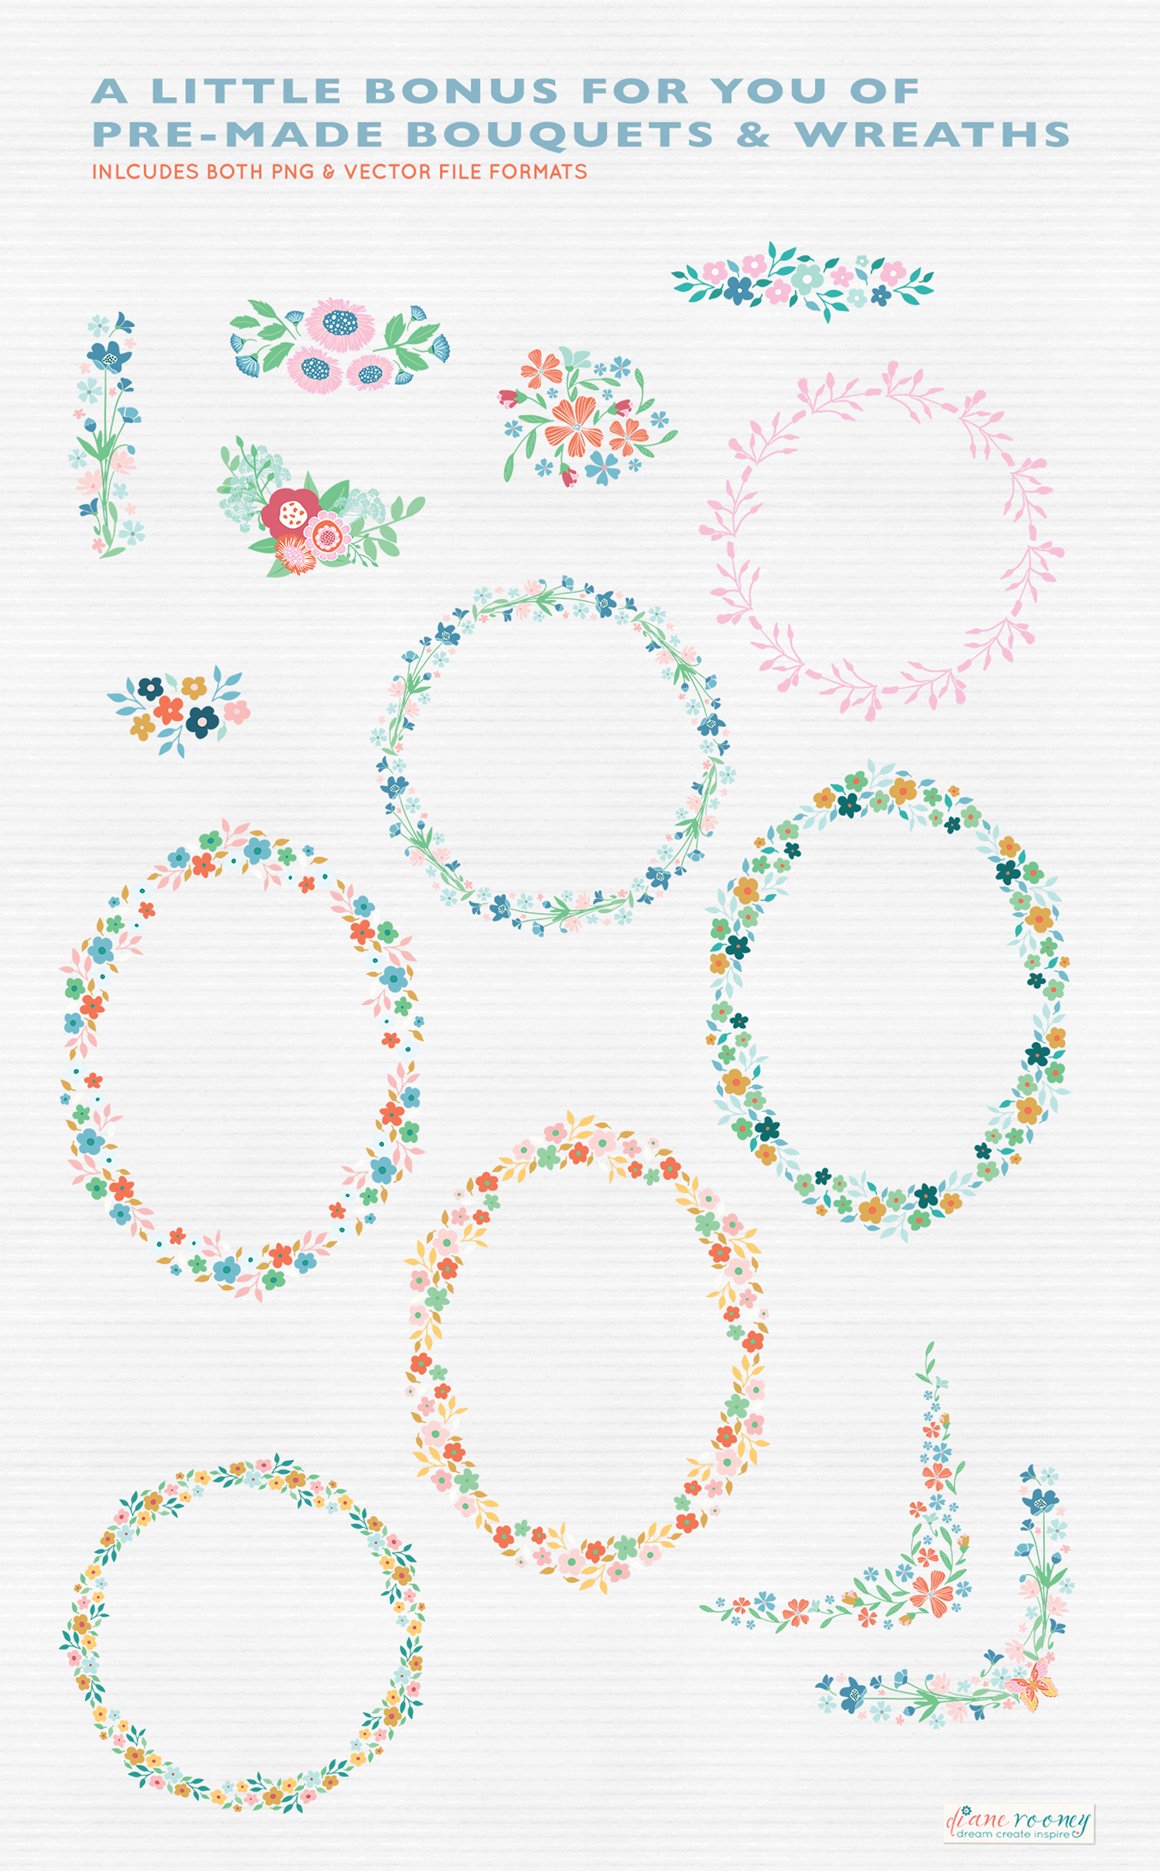 Sweet May Floral Patterns and Graphics